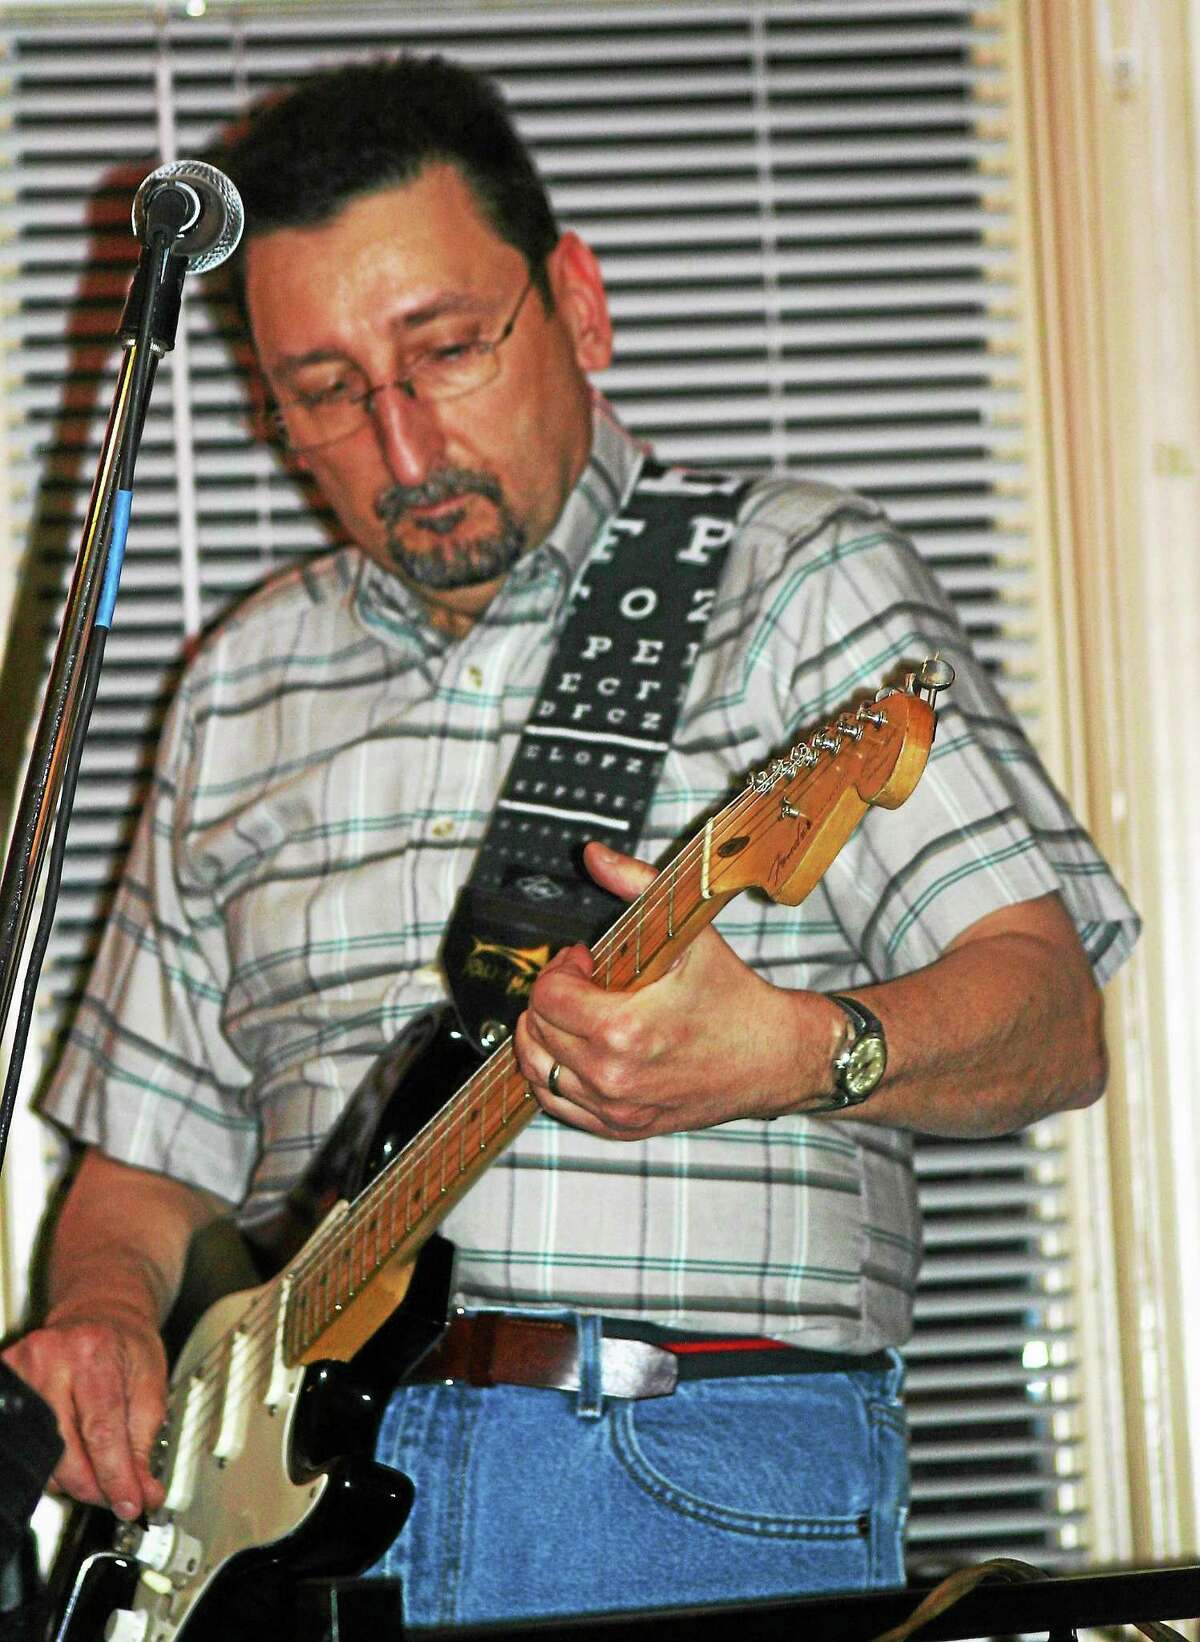 Photo by Domenic Forcella The Steve Polezonis Trio plays from 2-4 p.m. at Oktoberfest at Spaten Beerhall Saturday in New Britain.